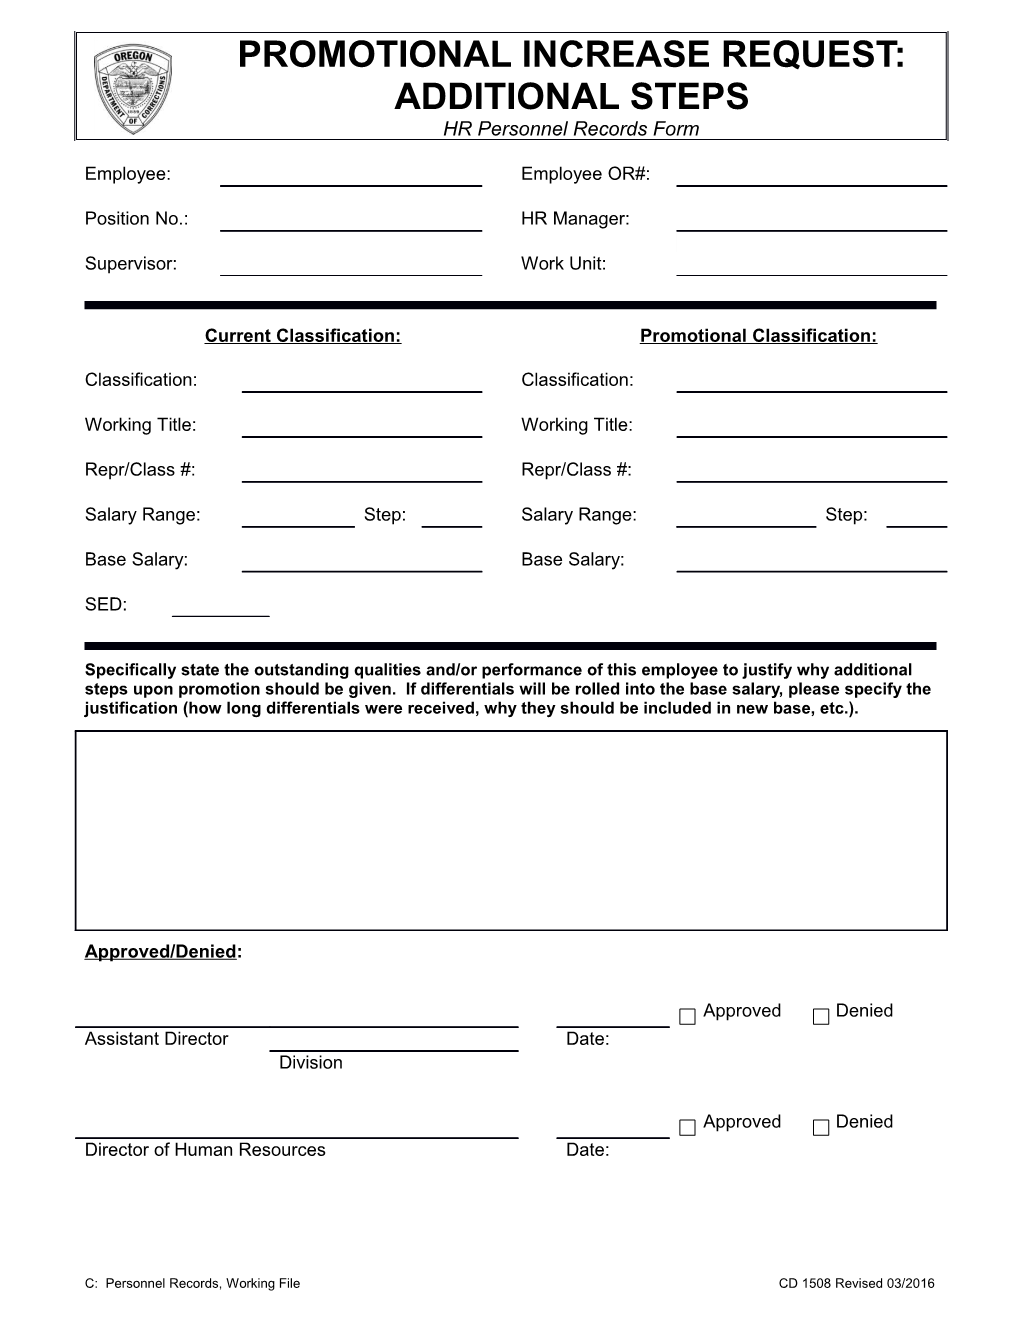 PROMOTIONAL INCREASE REQUEST: ADDITIONAL STEPS HR Personnel Records Form